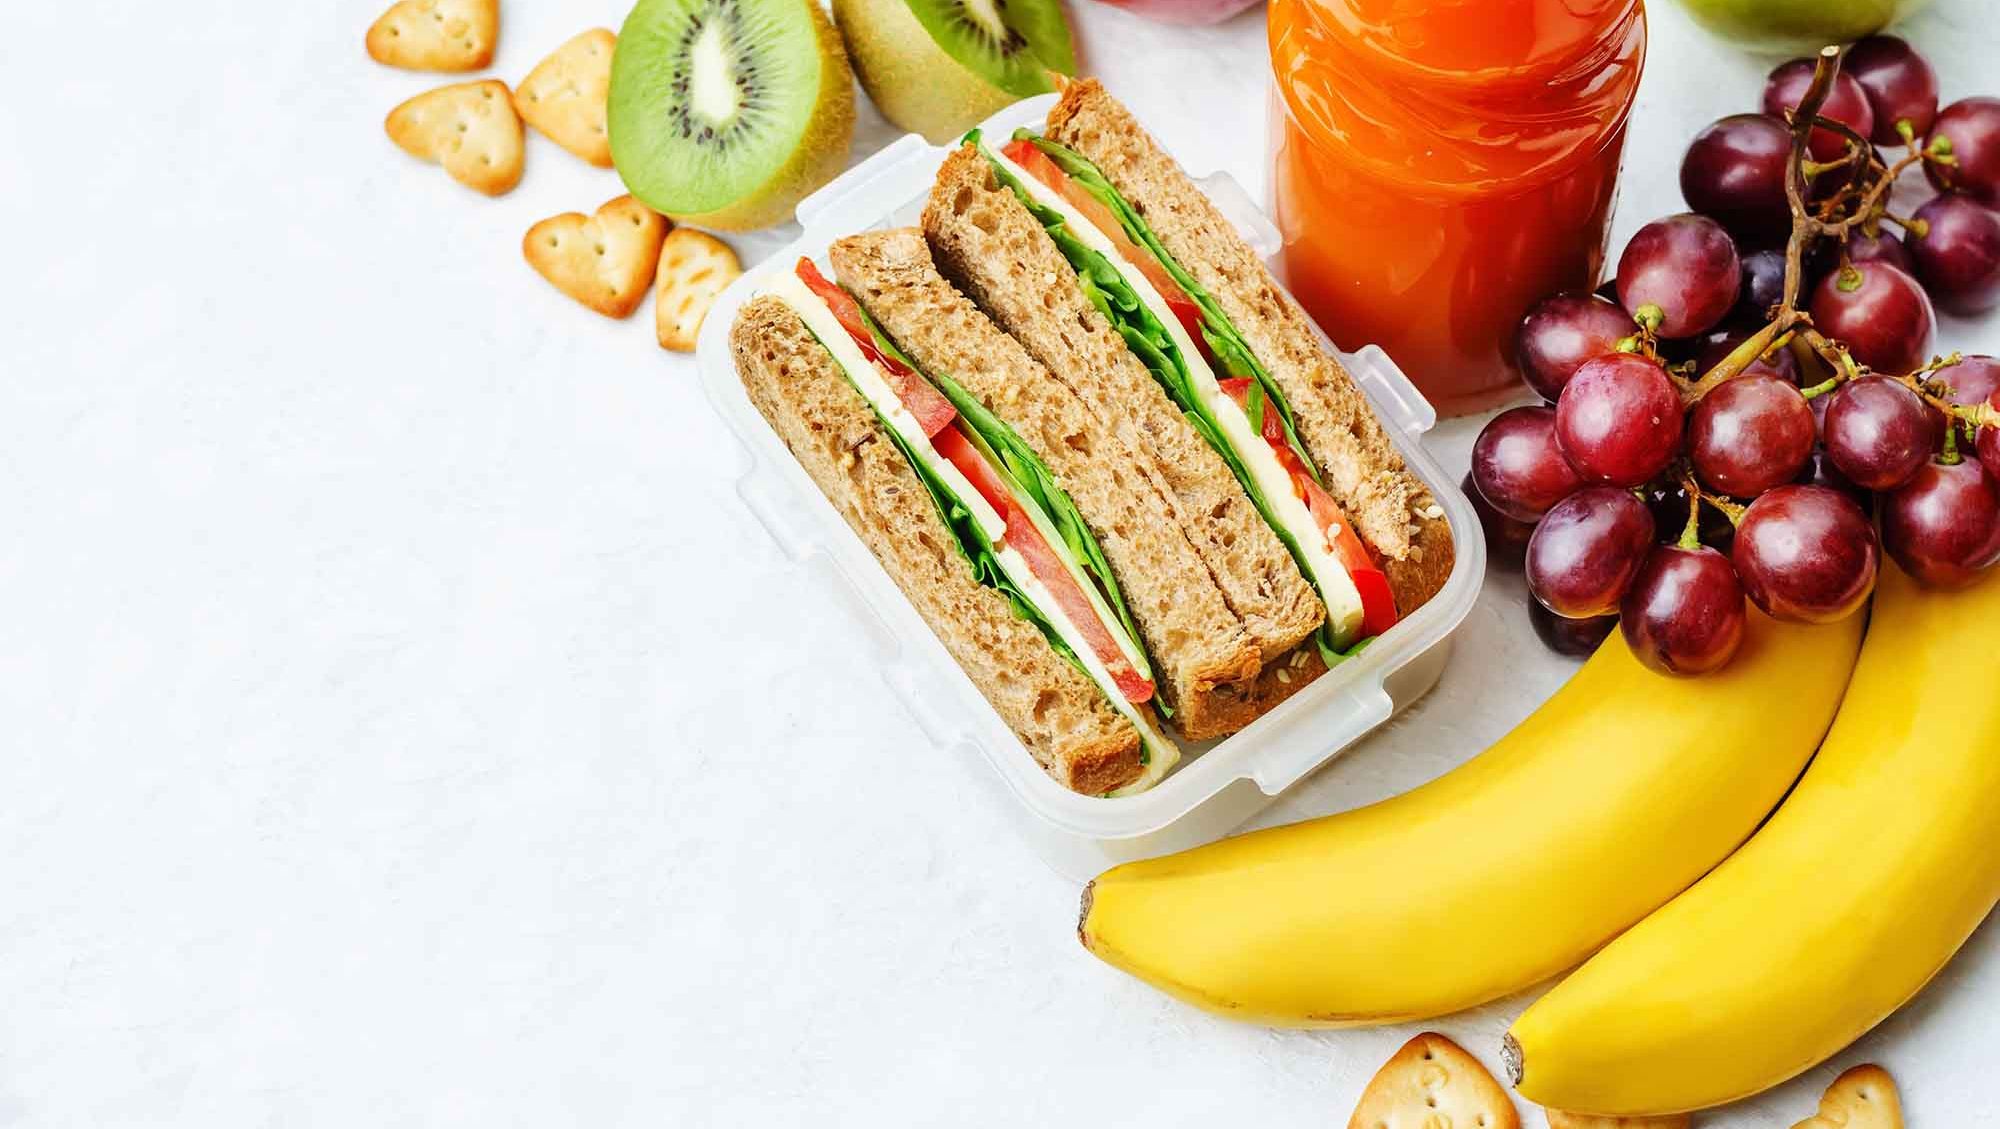 healthy school lunch on white background